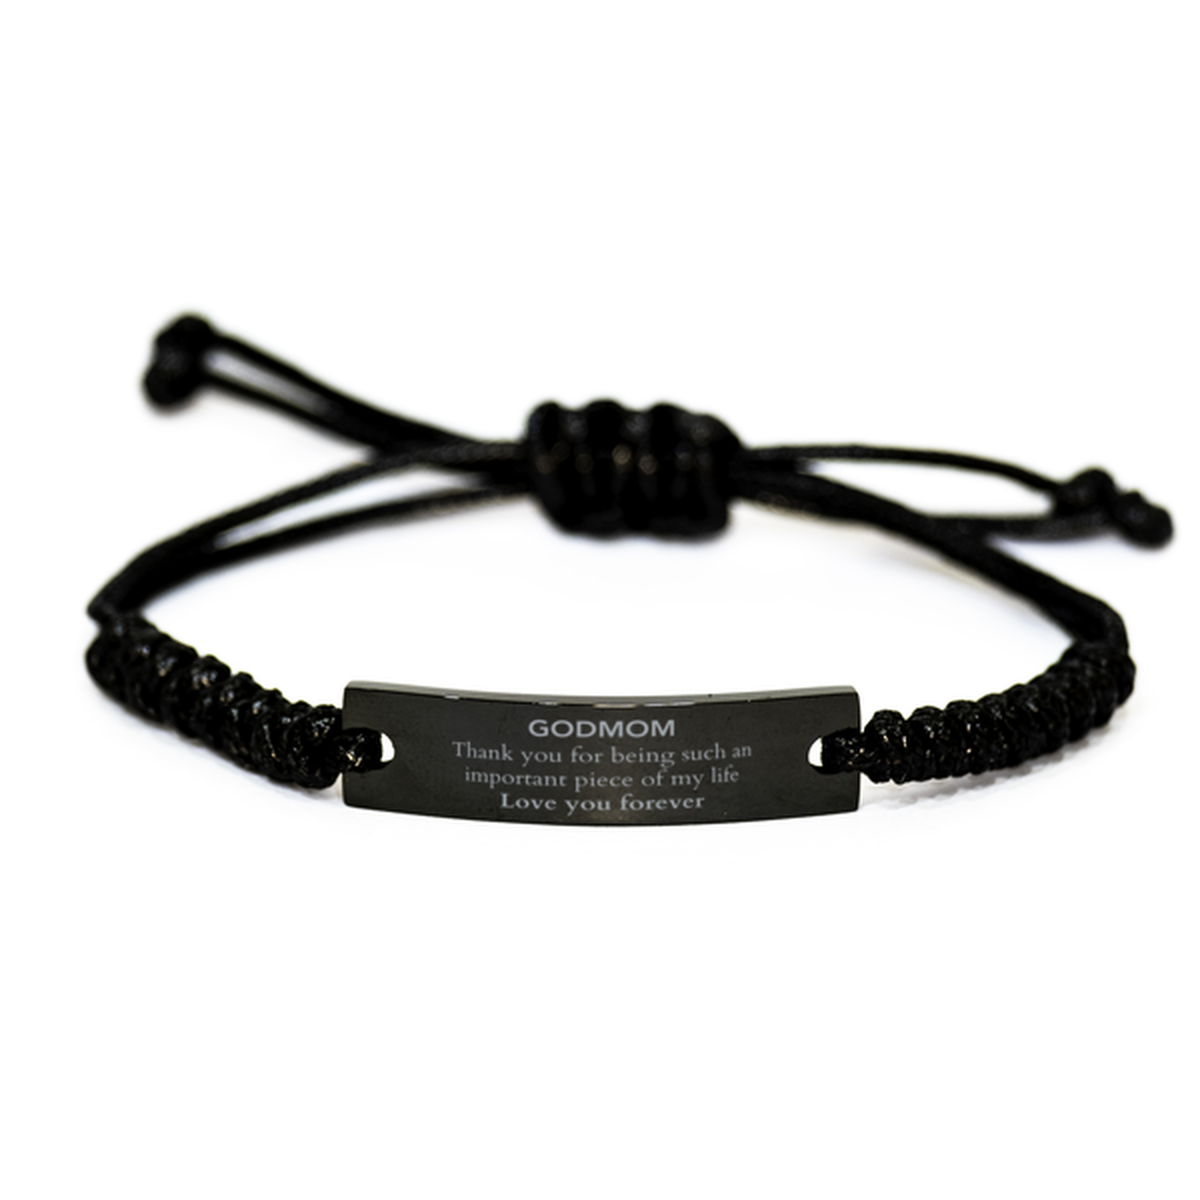 Appropriate Godmom Black Rope Bracelet Epic Birthday Gifts for Godmom Thank you for being such an important piece of my life Godmom Christmas Mothers Fathers Day